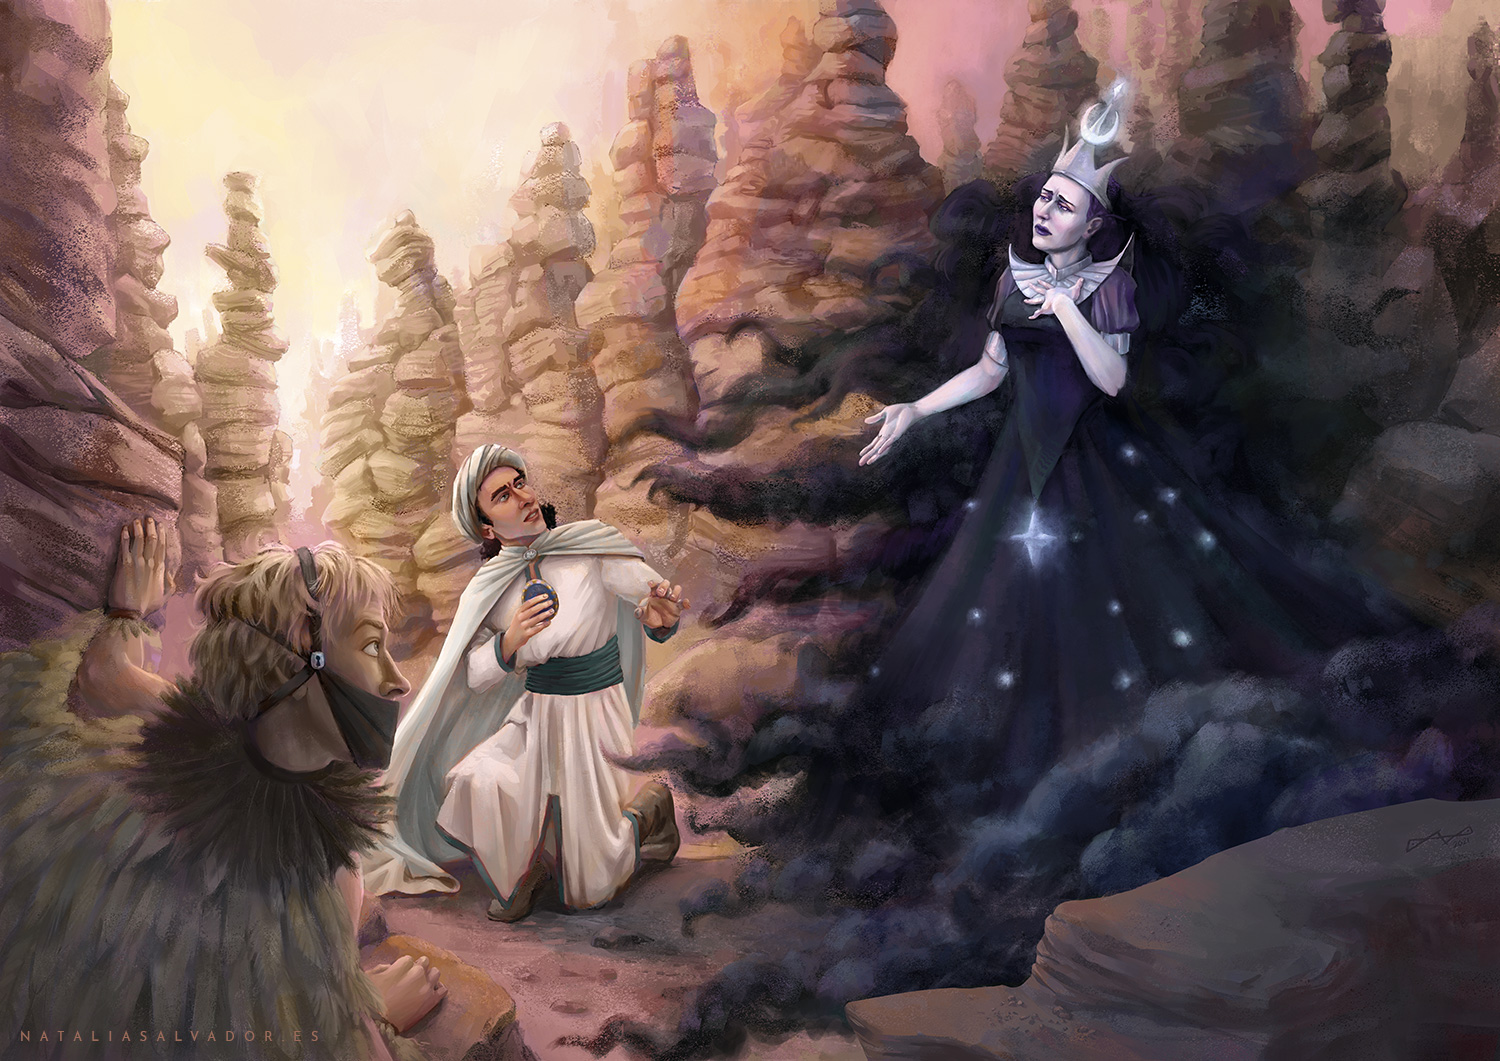 Digital illustration of The Queen of the Night talking to Tamino by Natalia Salvador